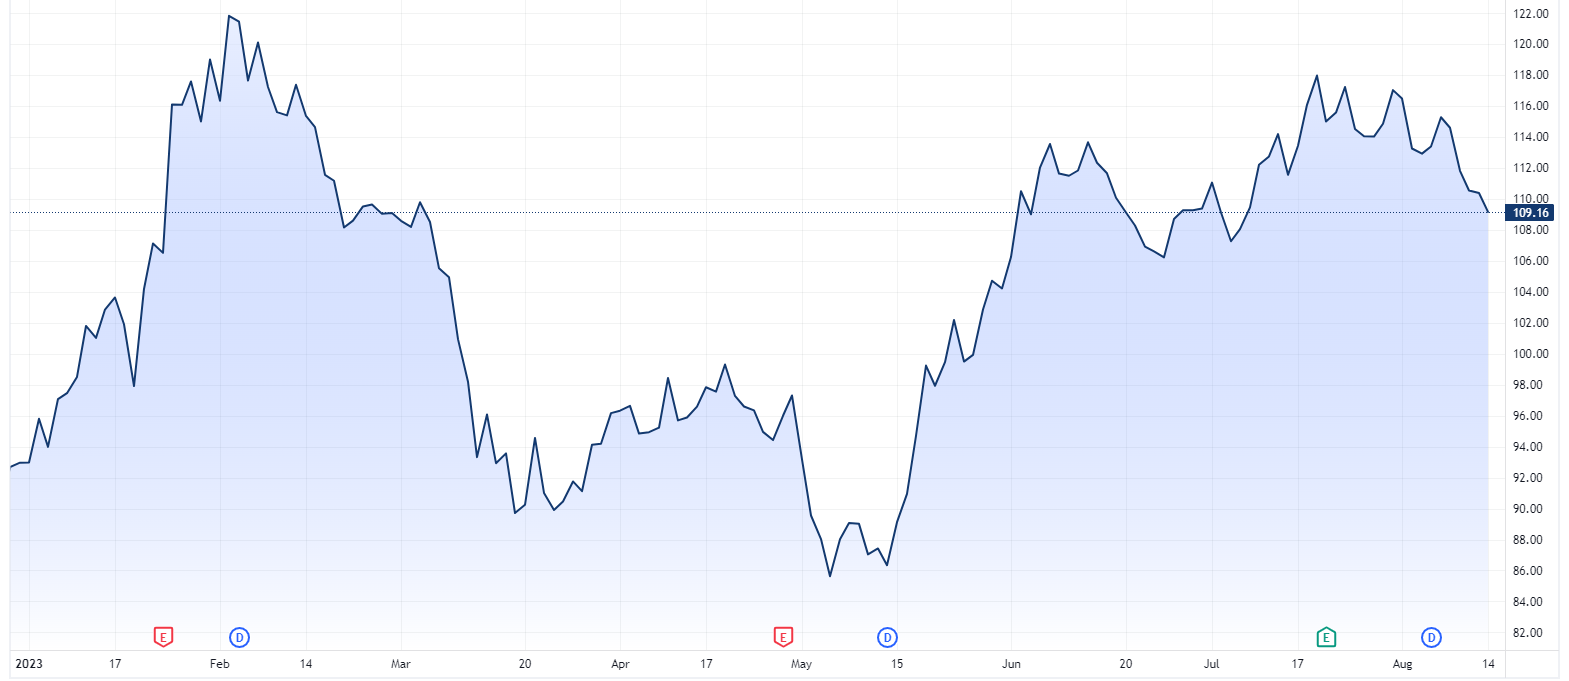 Capital One Financial year-to-date chart (Source: TradingView)